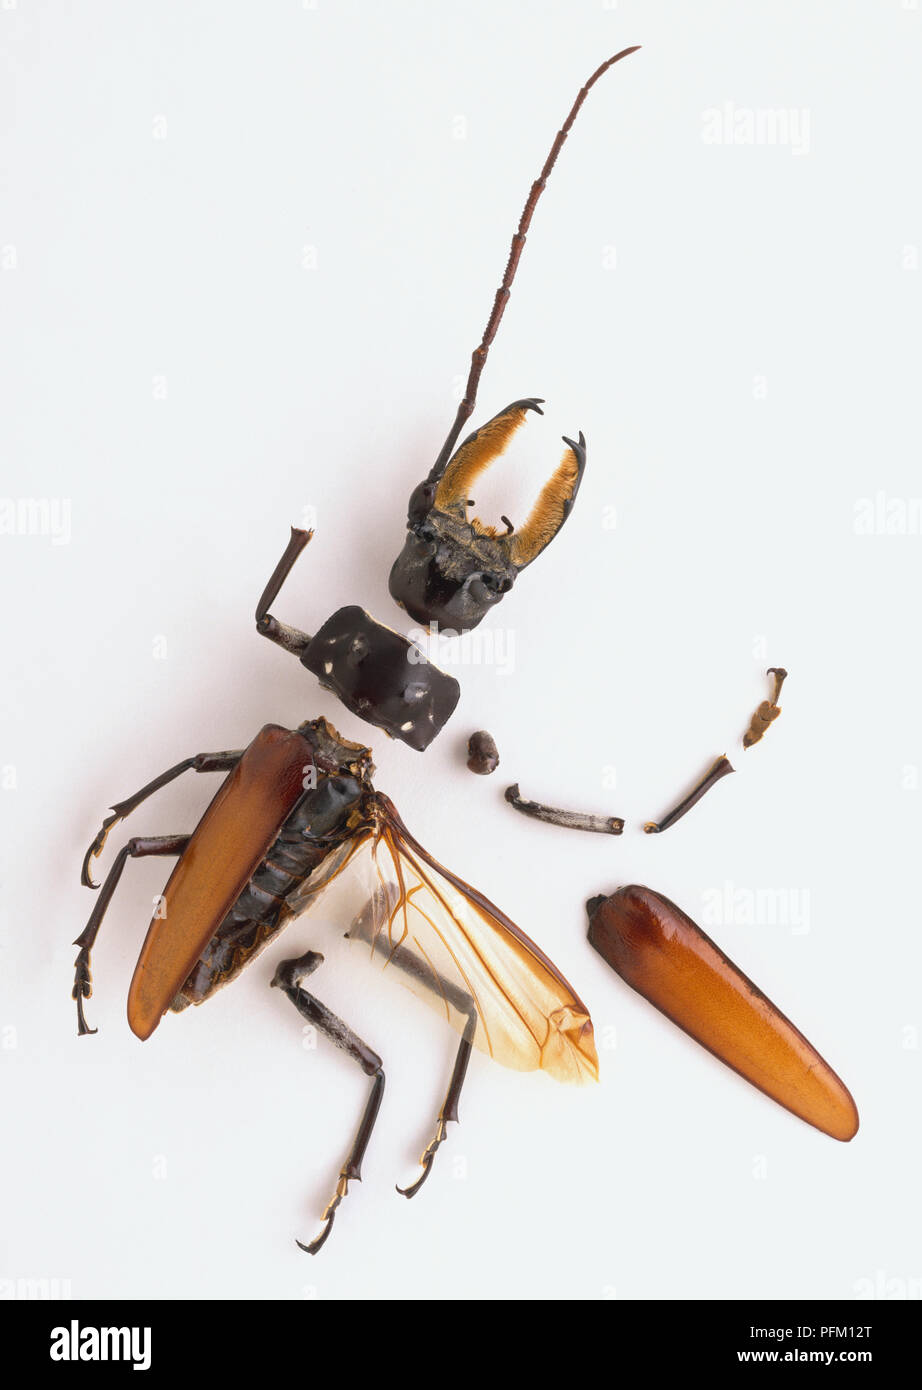 Segmented exoskeleton of a beetle separated into parts including the head with large mandibles, wings and carapace and legs. Stock Photo